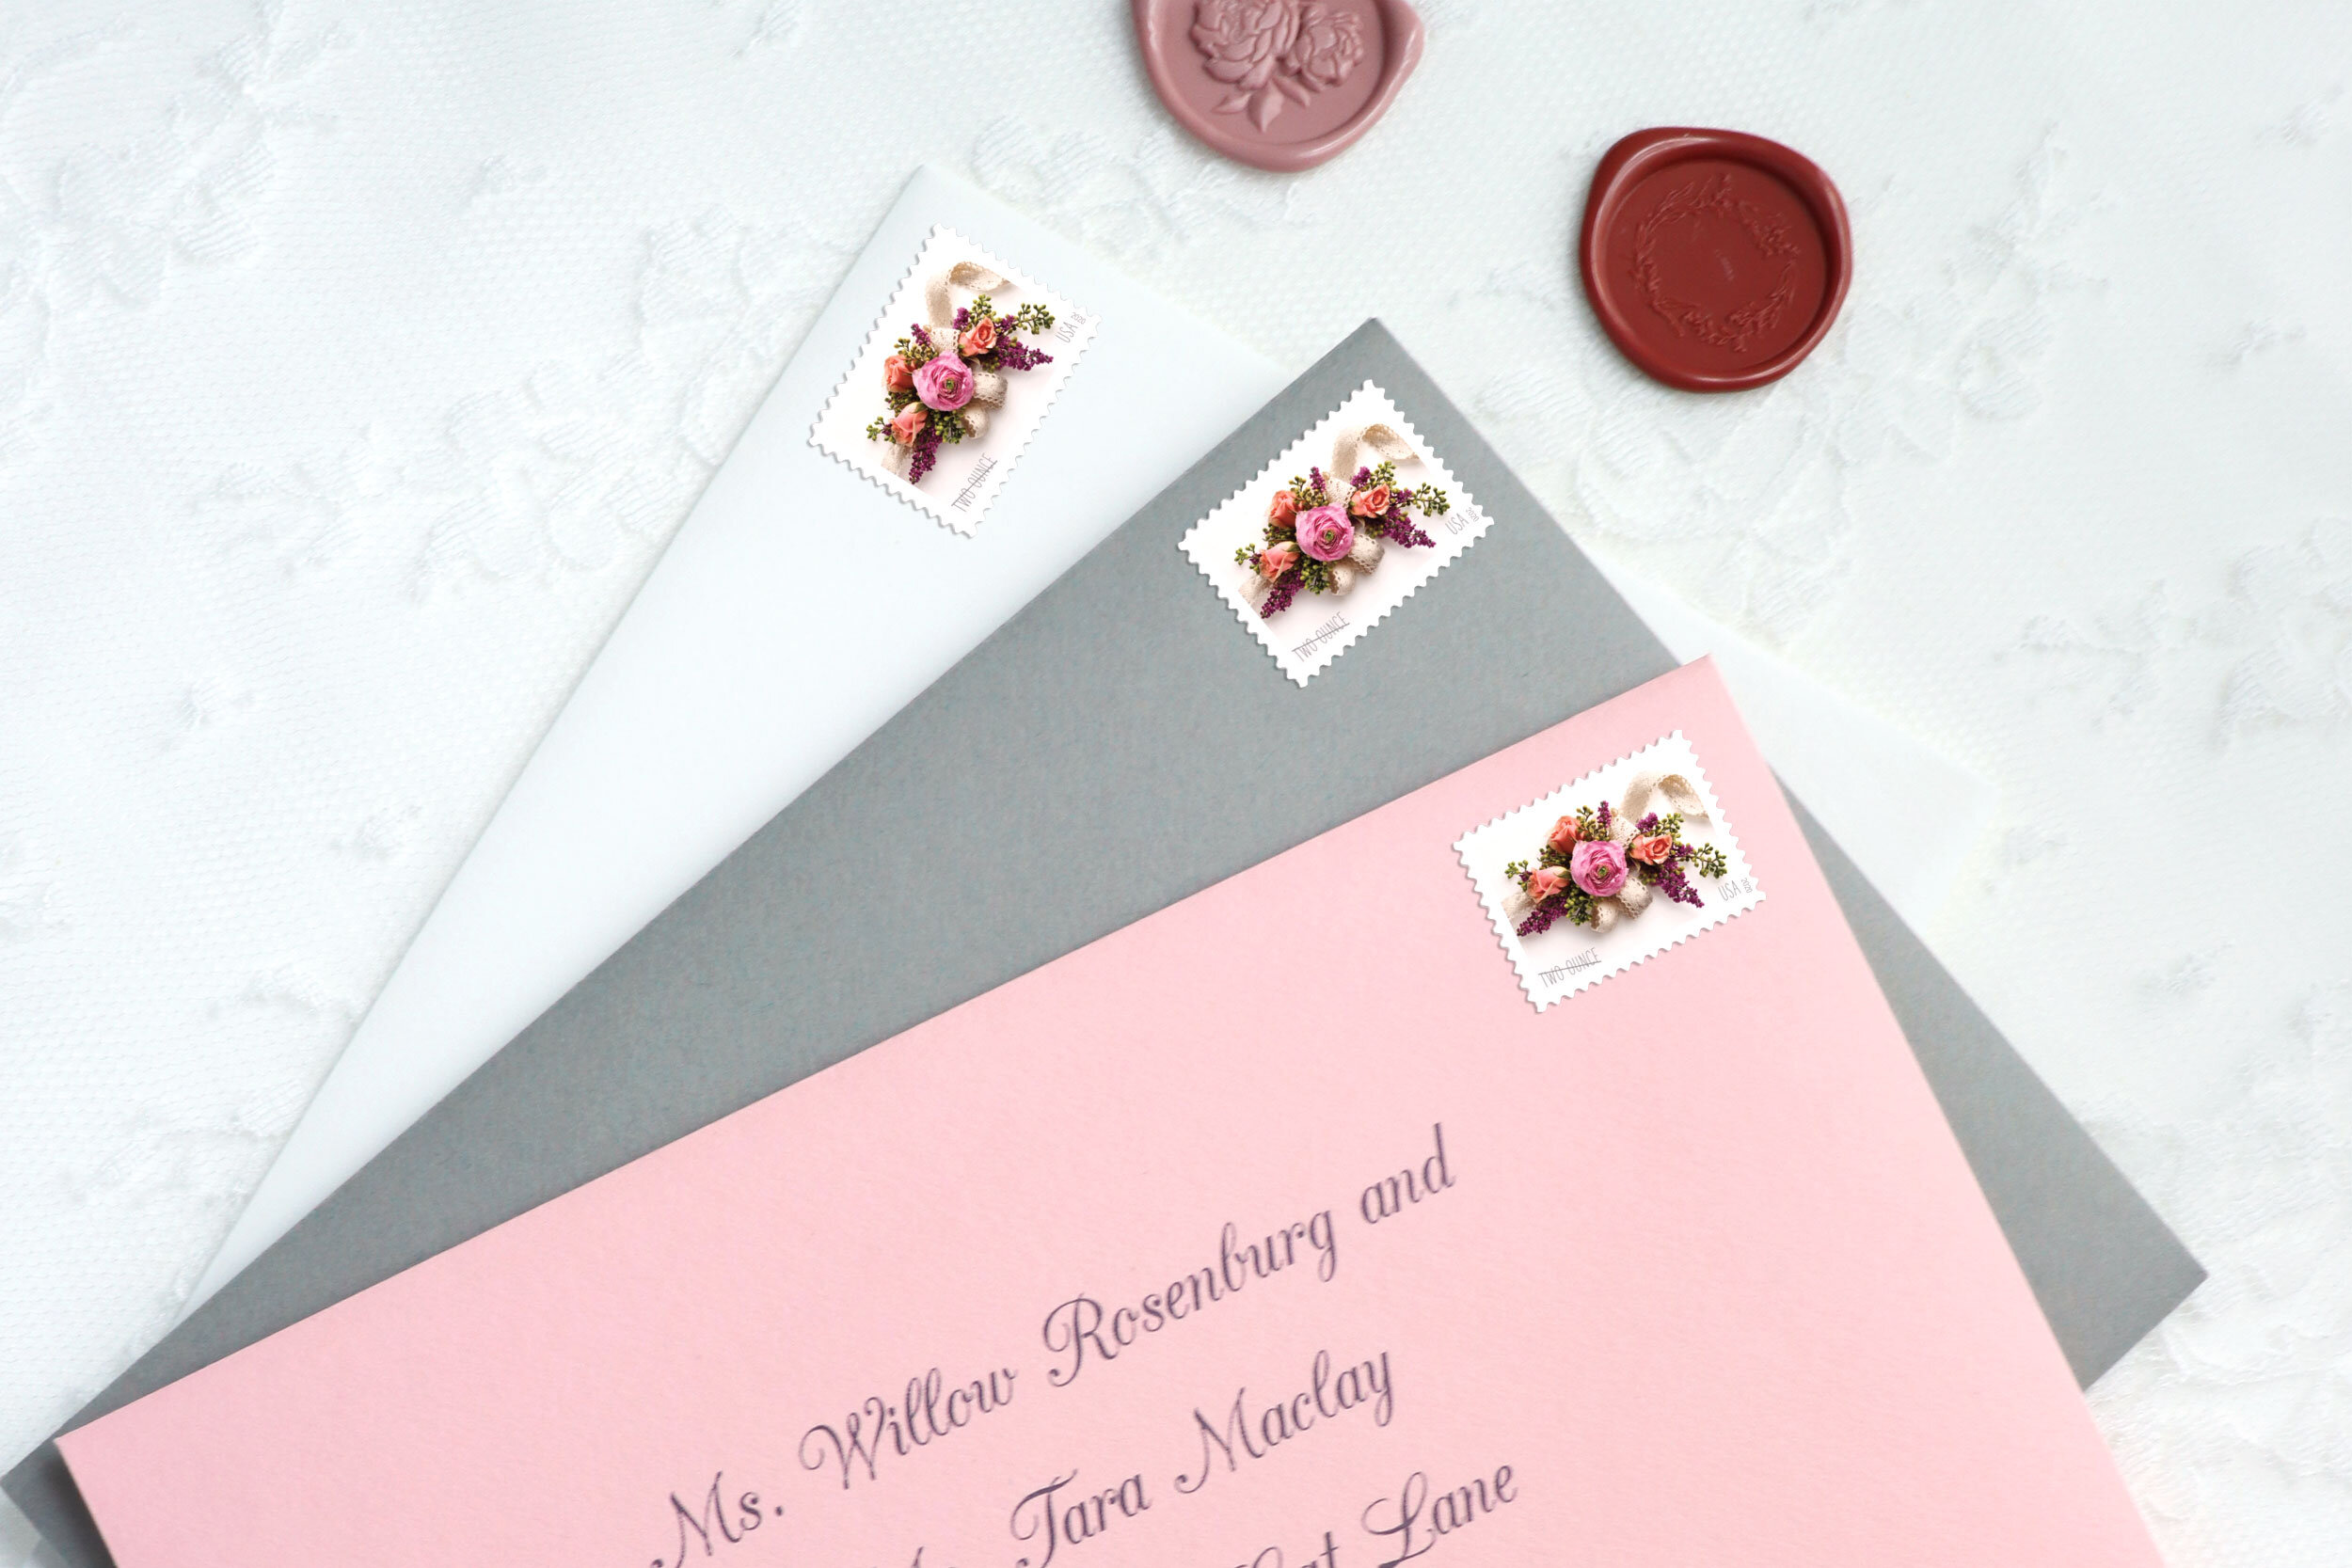 Mailing Your Wedding Invitations & How to Navigate the Post Office –  Camellia Memories